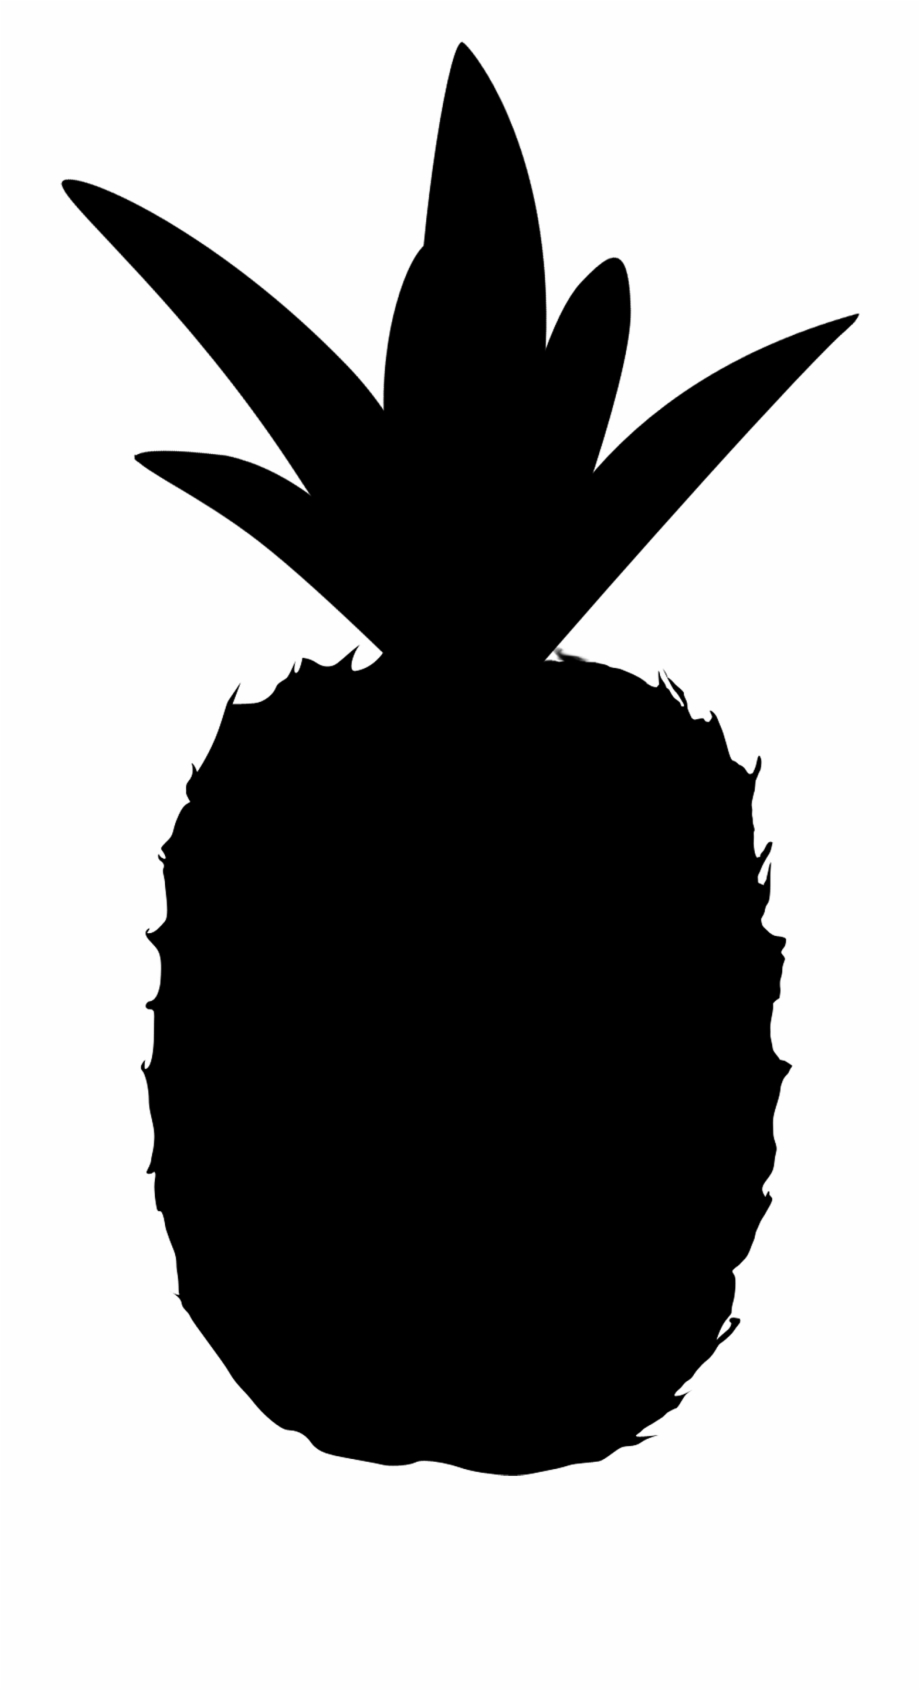 Pineapple Silhouette Png Transparent Pineapple Silhouette Png